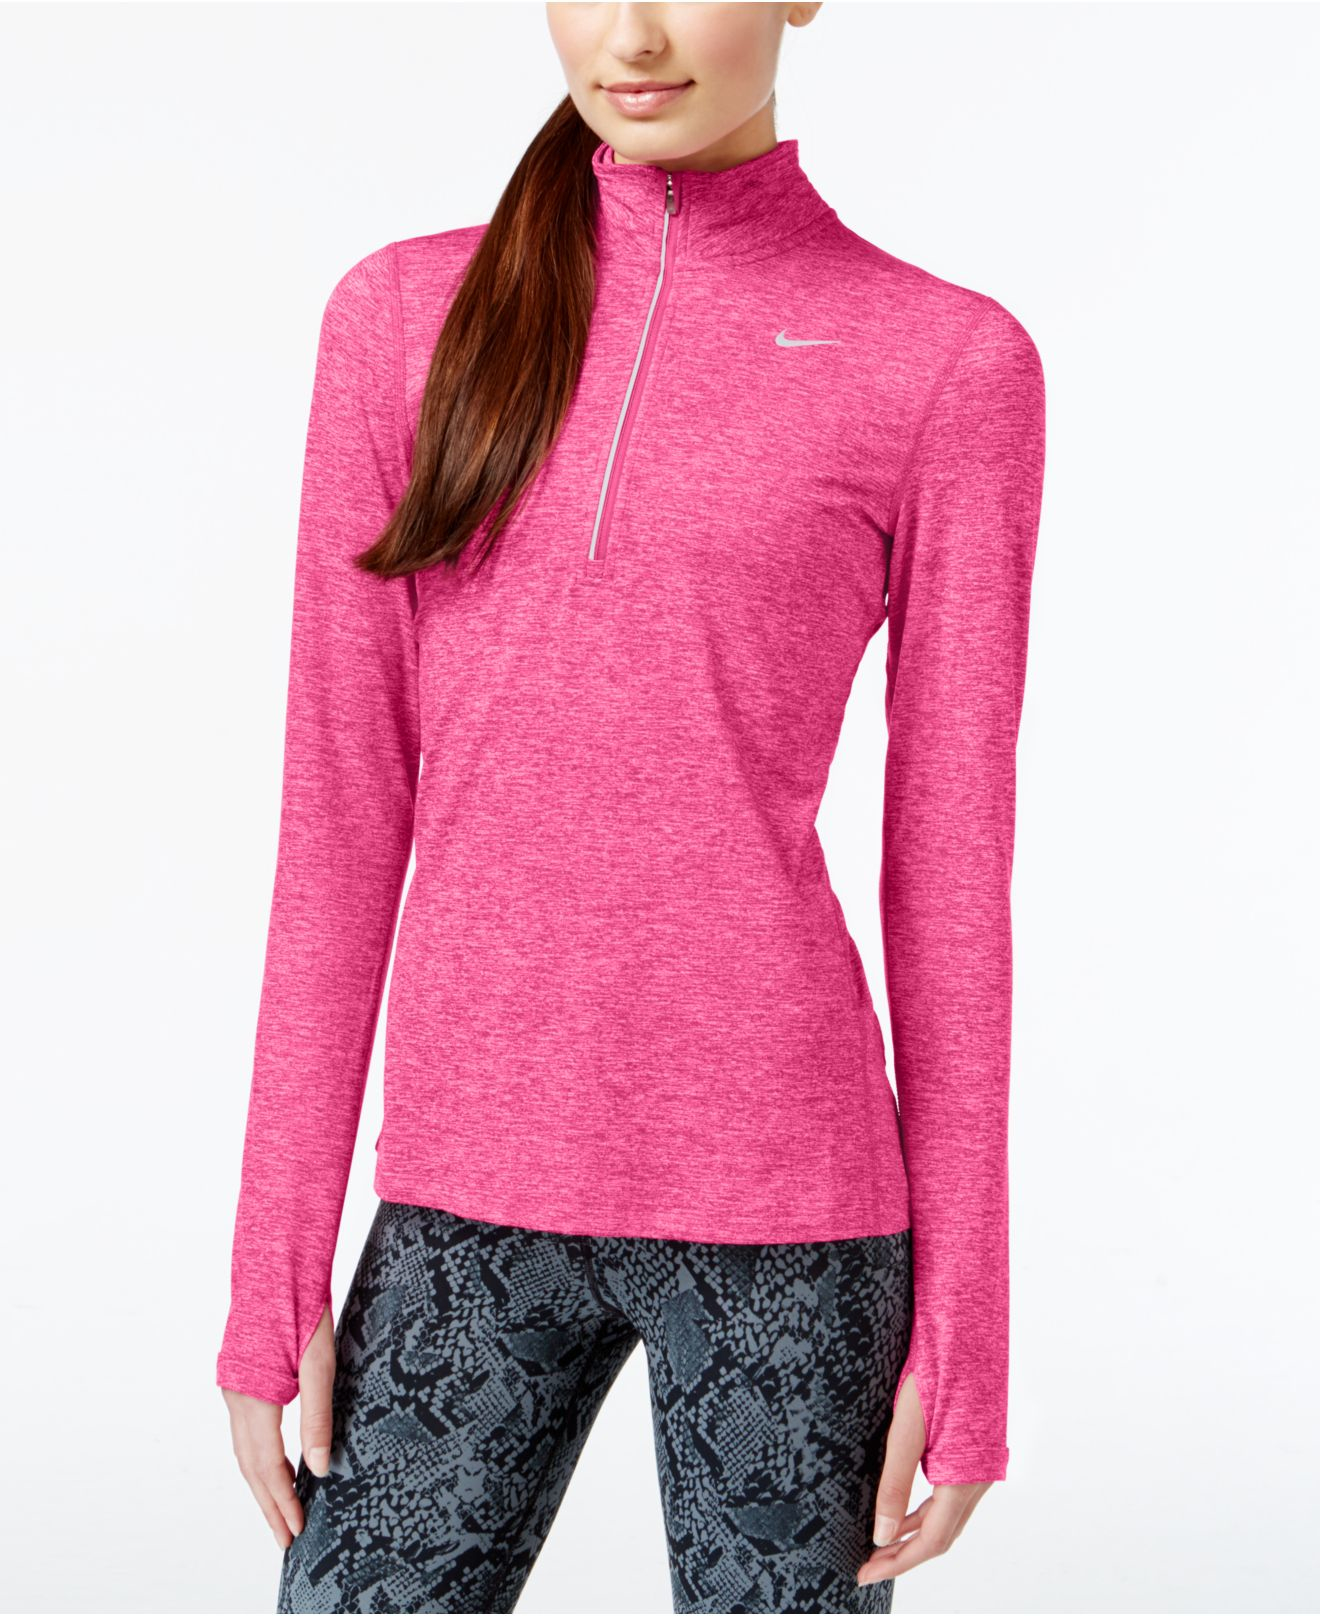 Nike Synthetic Element Dri-fit Half-zip Running Top in Pink | Lyst